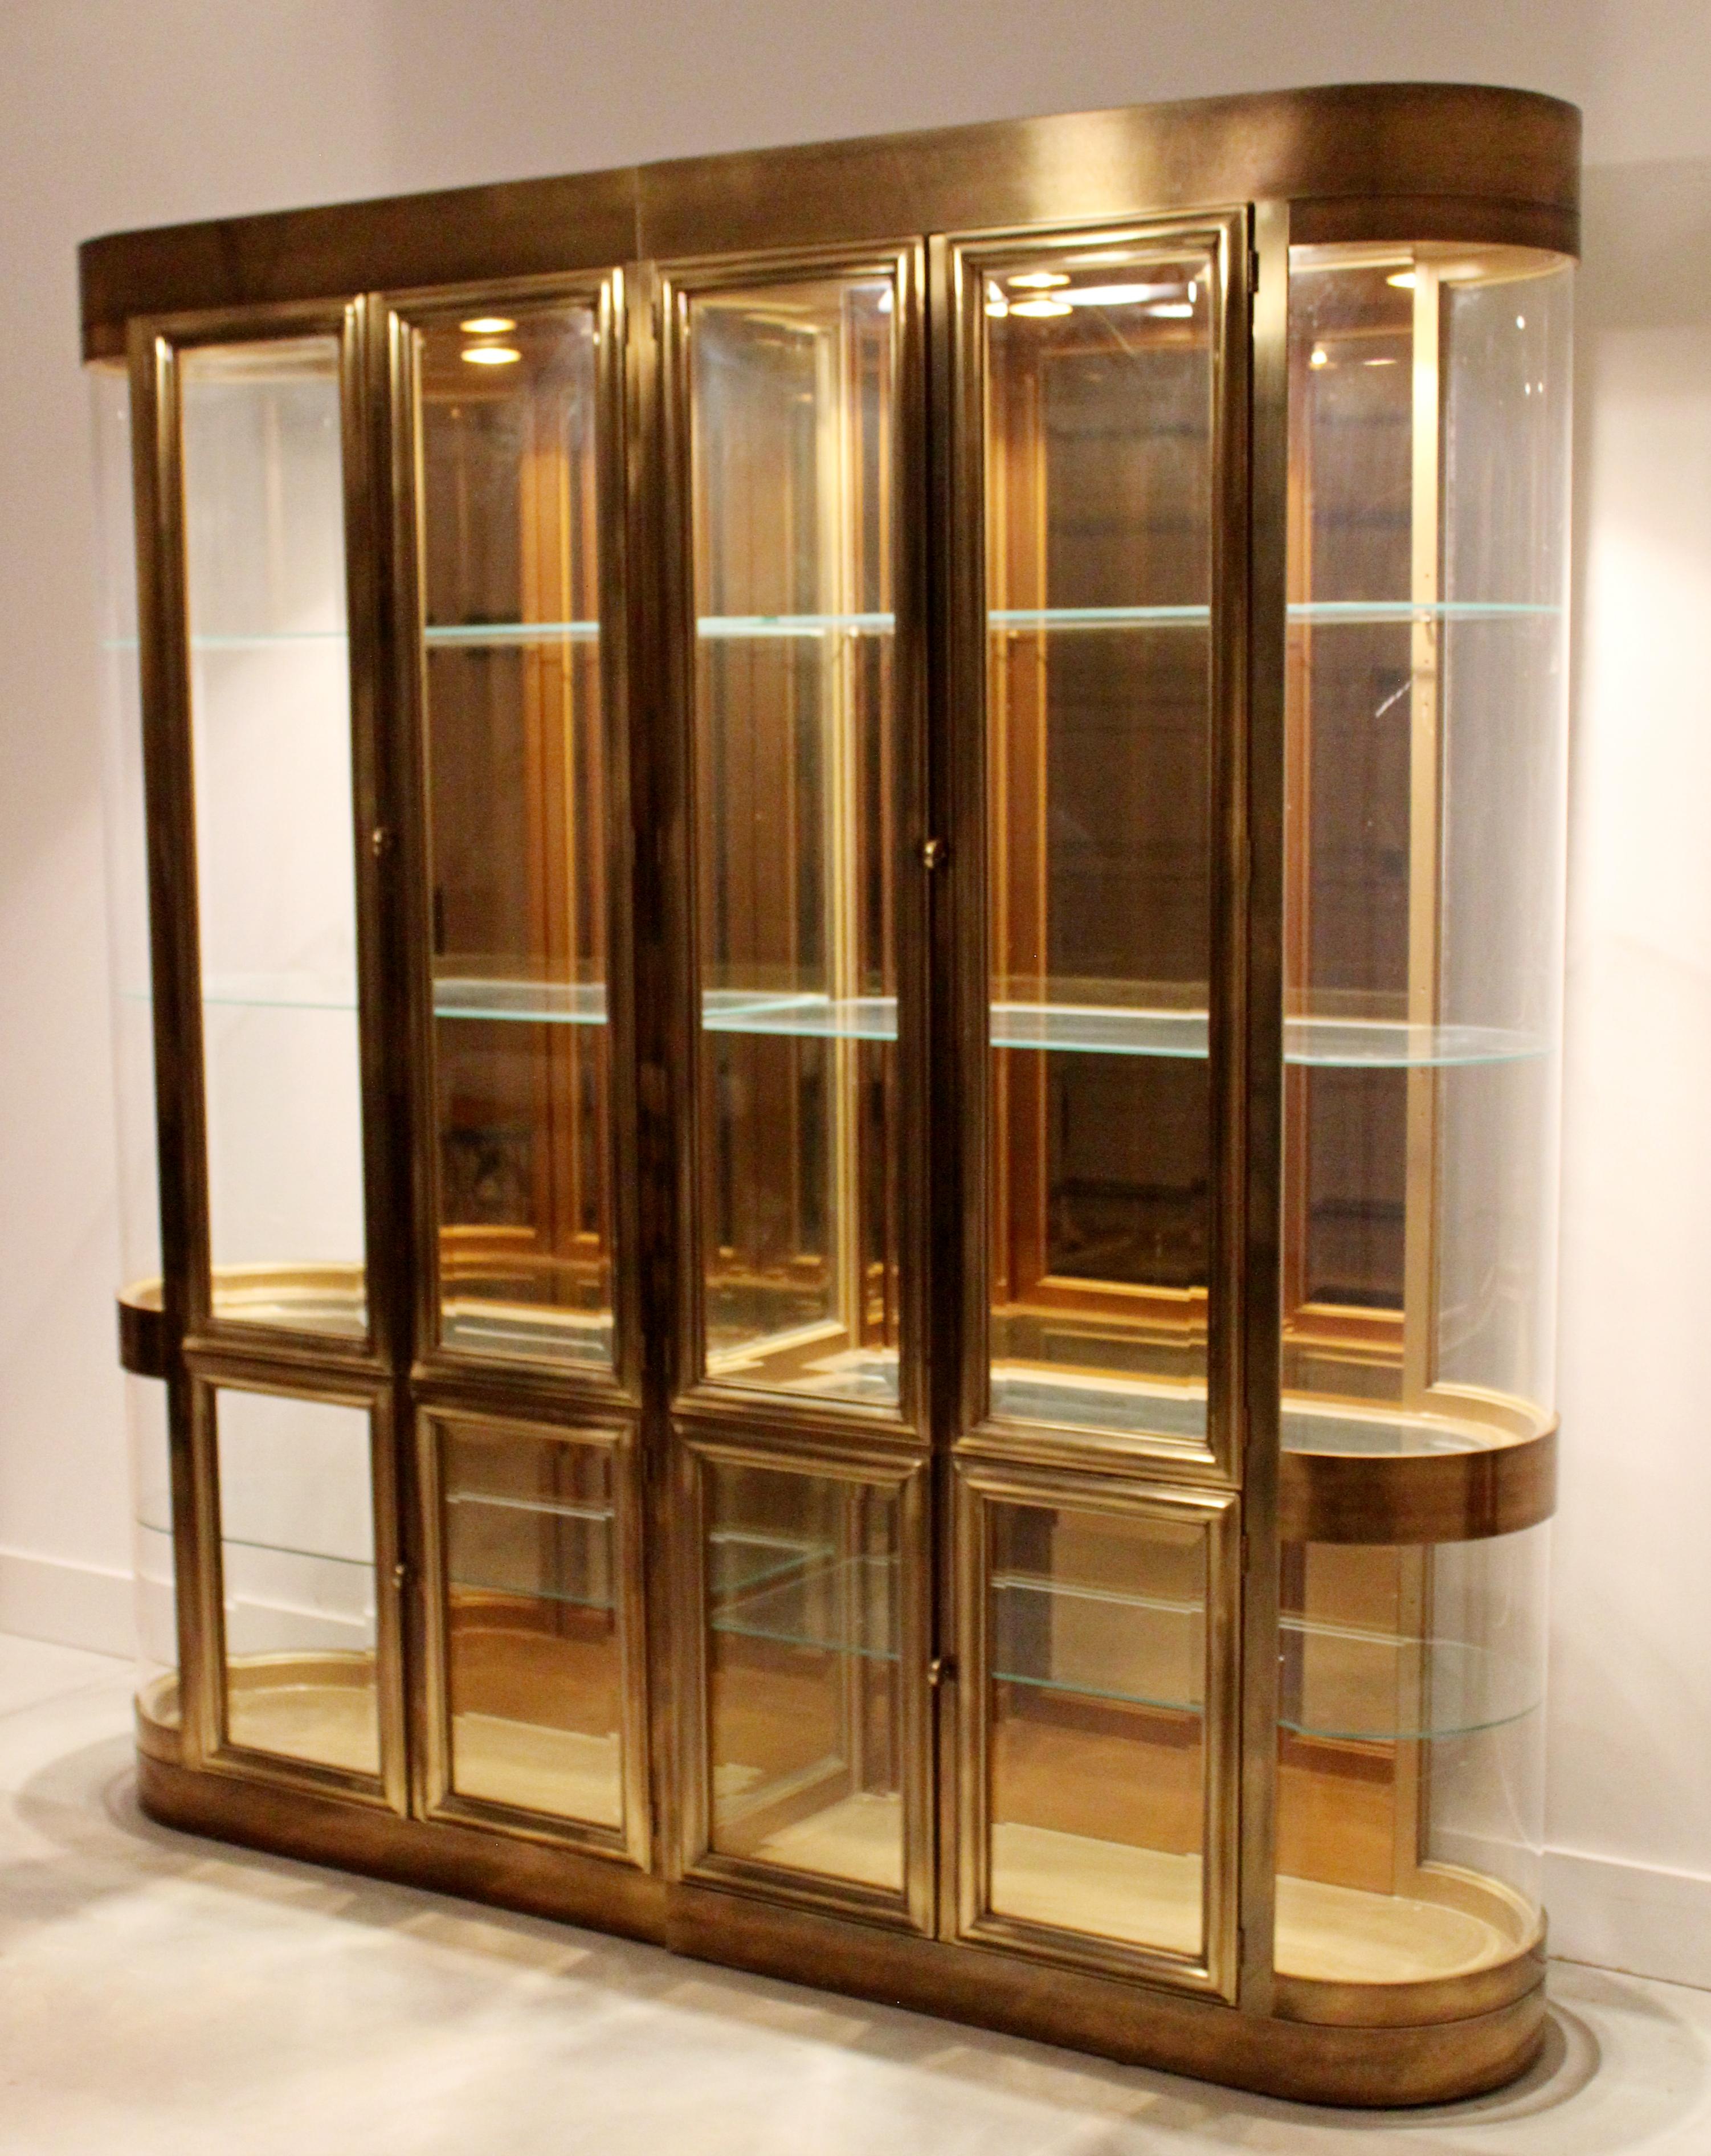 For your consideration is a lavish and large, light up, brass and glass shelving unit vitrine, with eight shelves, by Mastercraft, circa 1960s. In good vintage condition, with some surface scratches and a large chip in one of the shelves. The